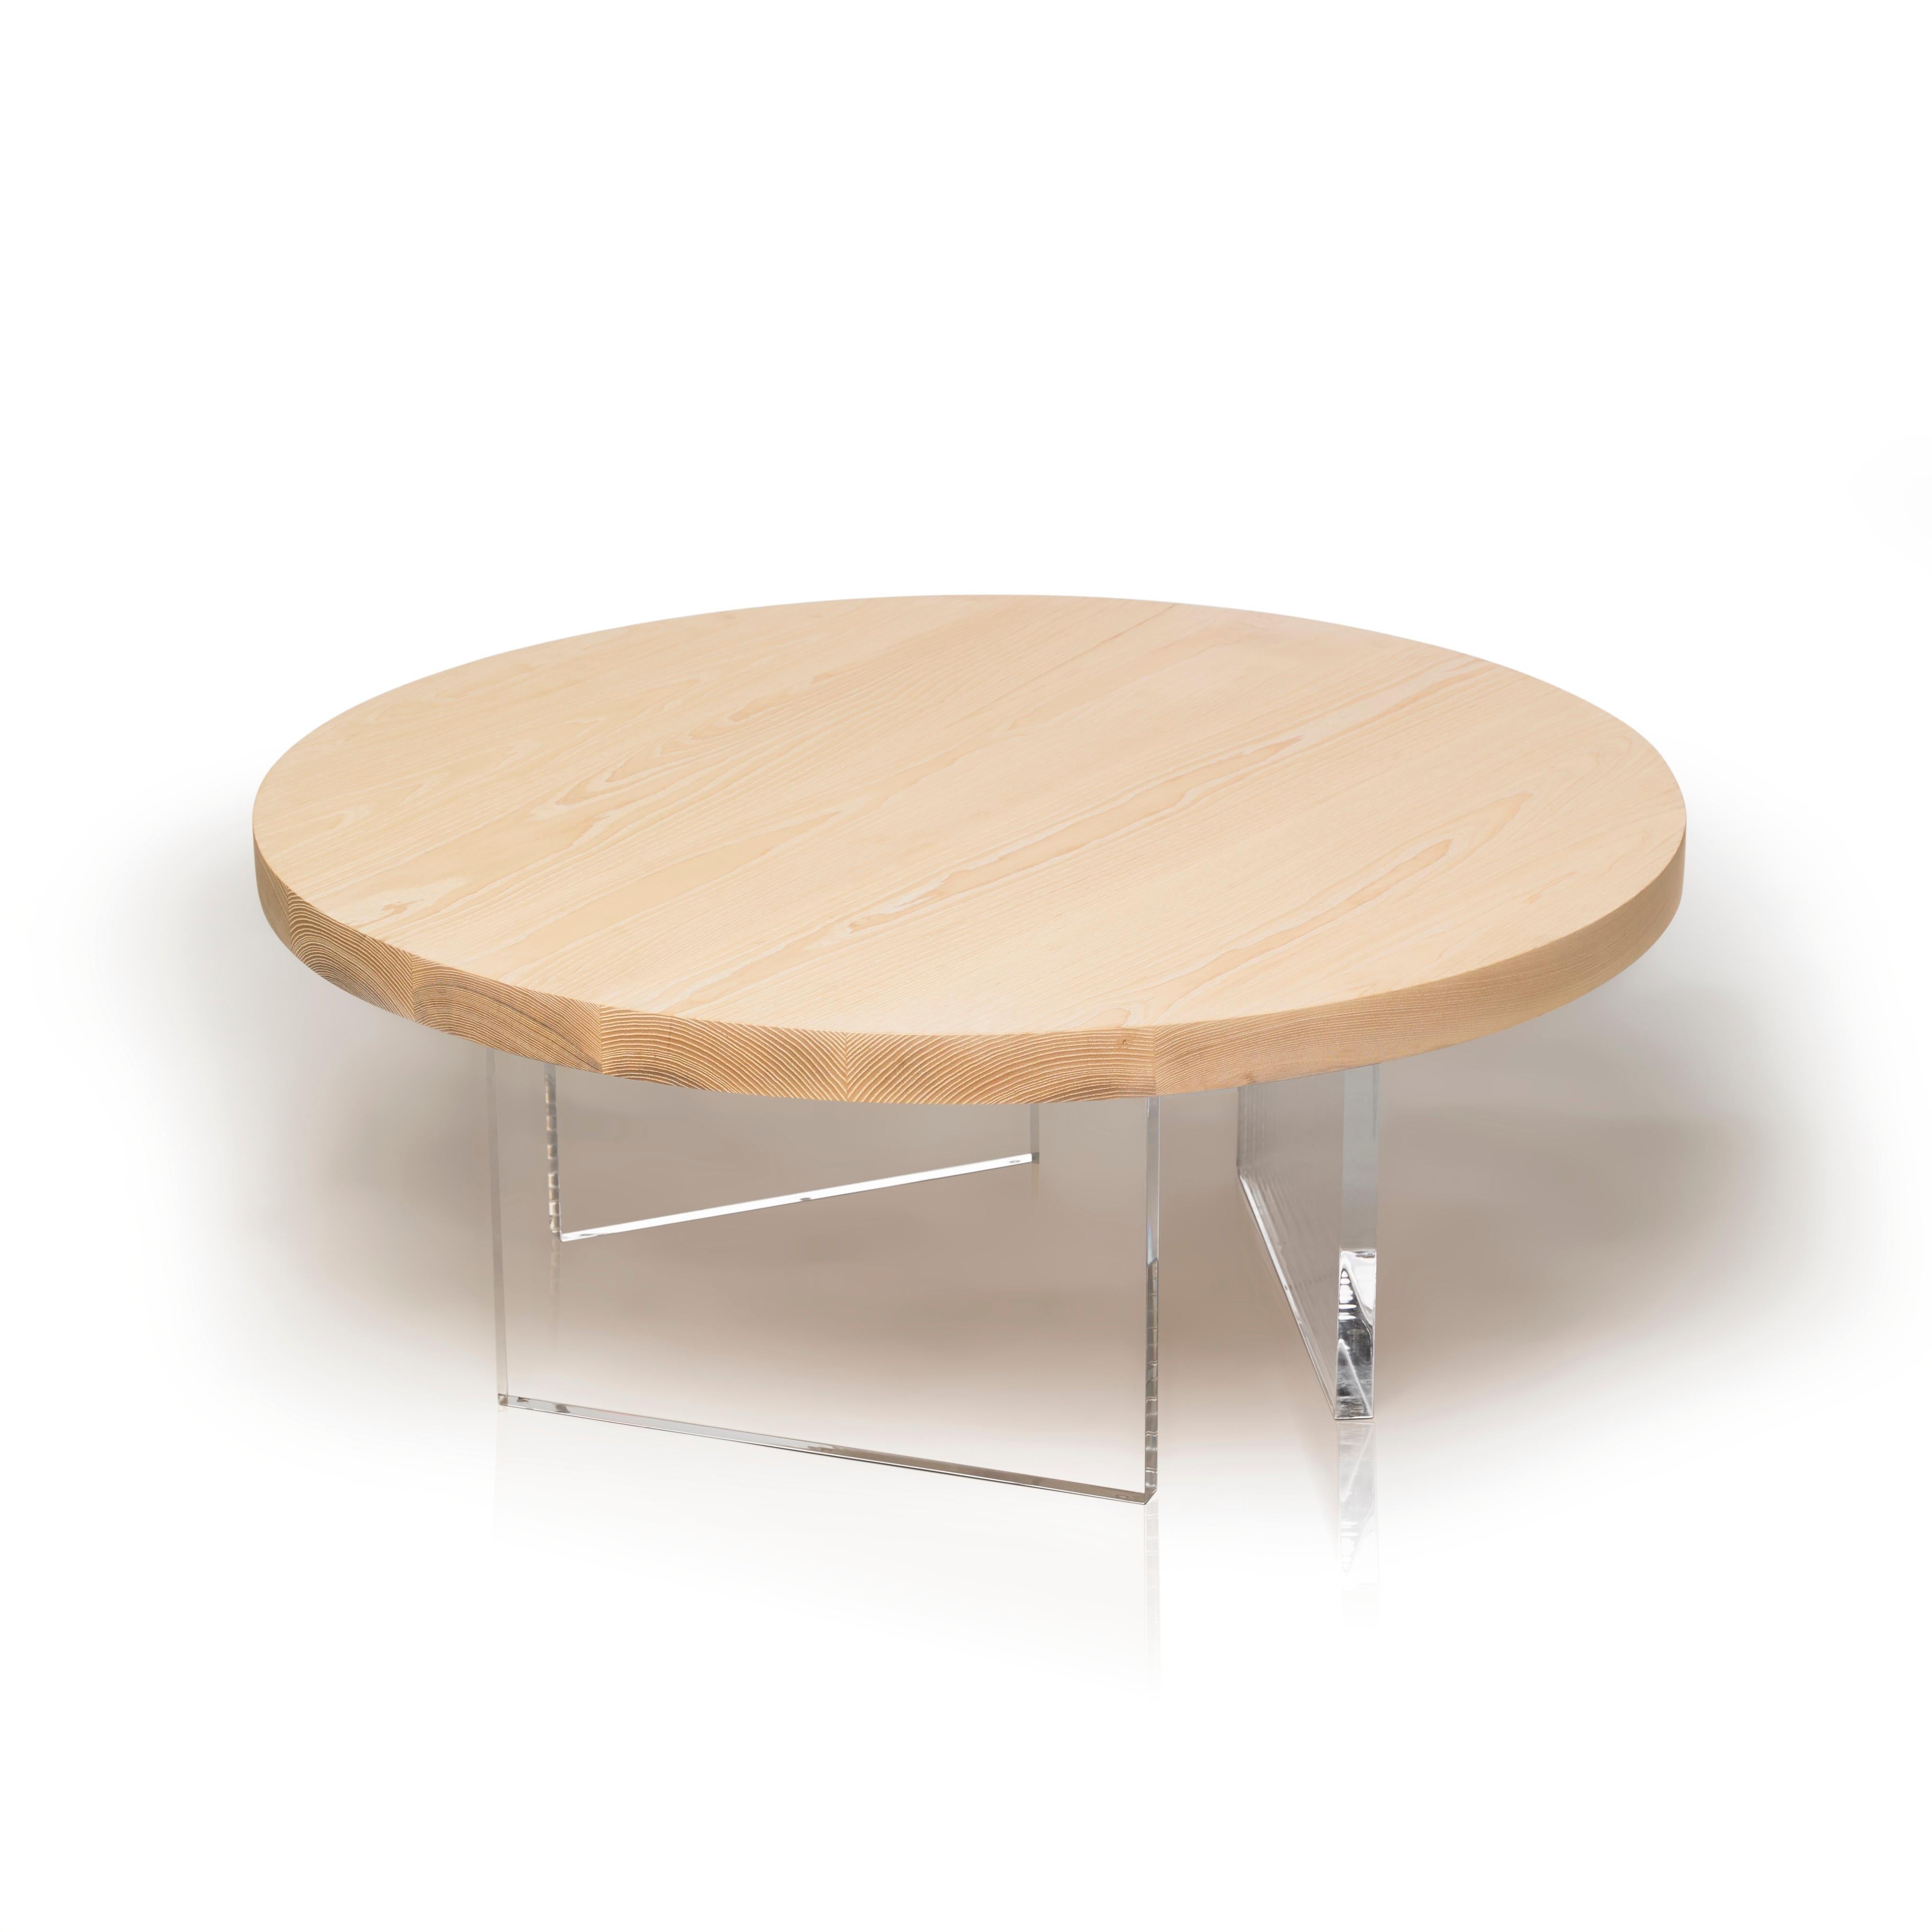 The refined Constantinople Round coffee table in whitened ash solid wood provides a contemporary and clean-lined feel to its space. The tabletop sits on three asymmetrical acrylic one-inch thick legs that allow light to pass through for an airy,